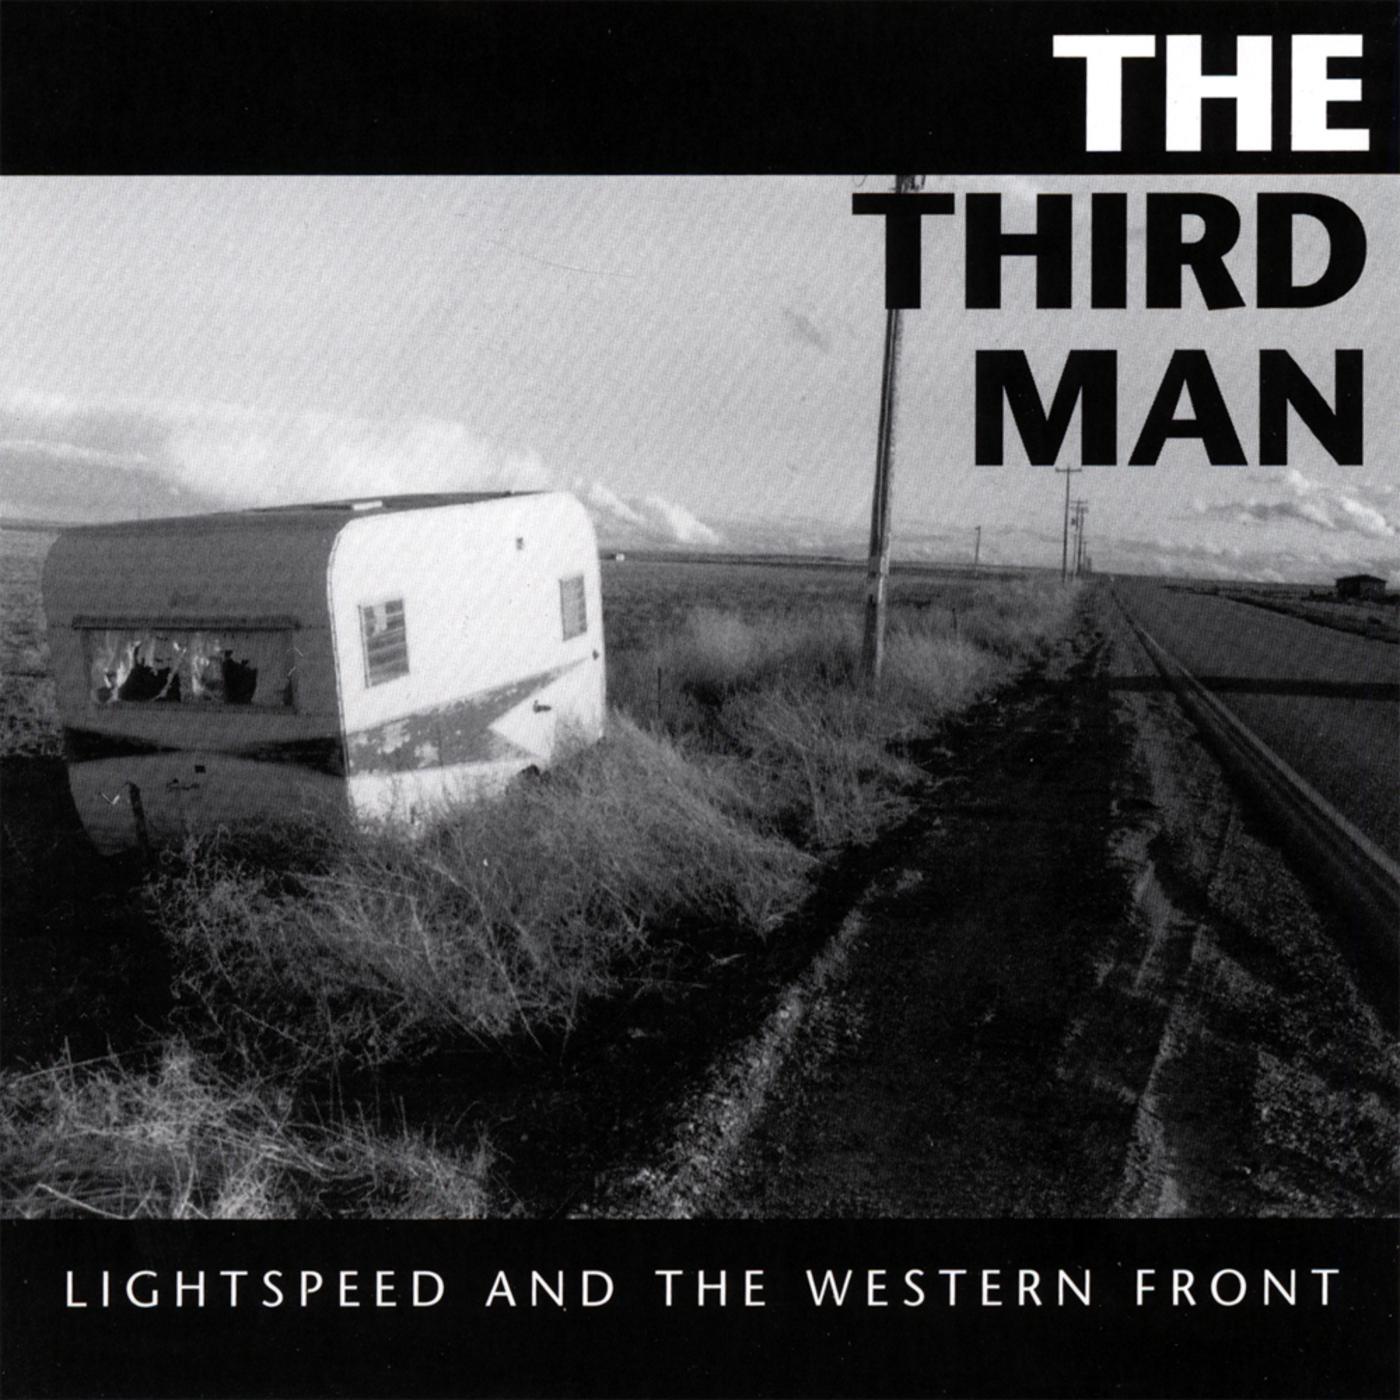 Lightspeed and the Western Front